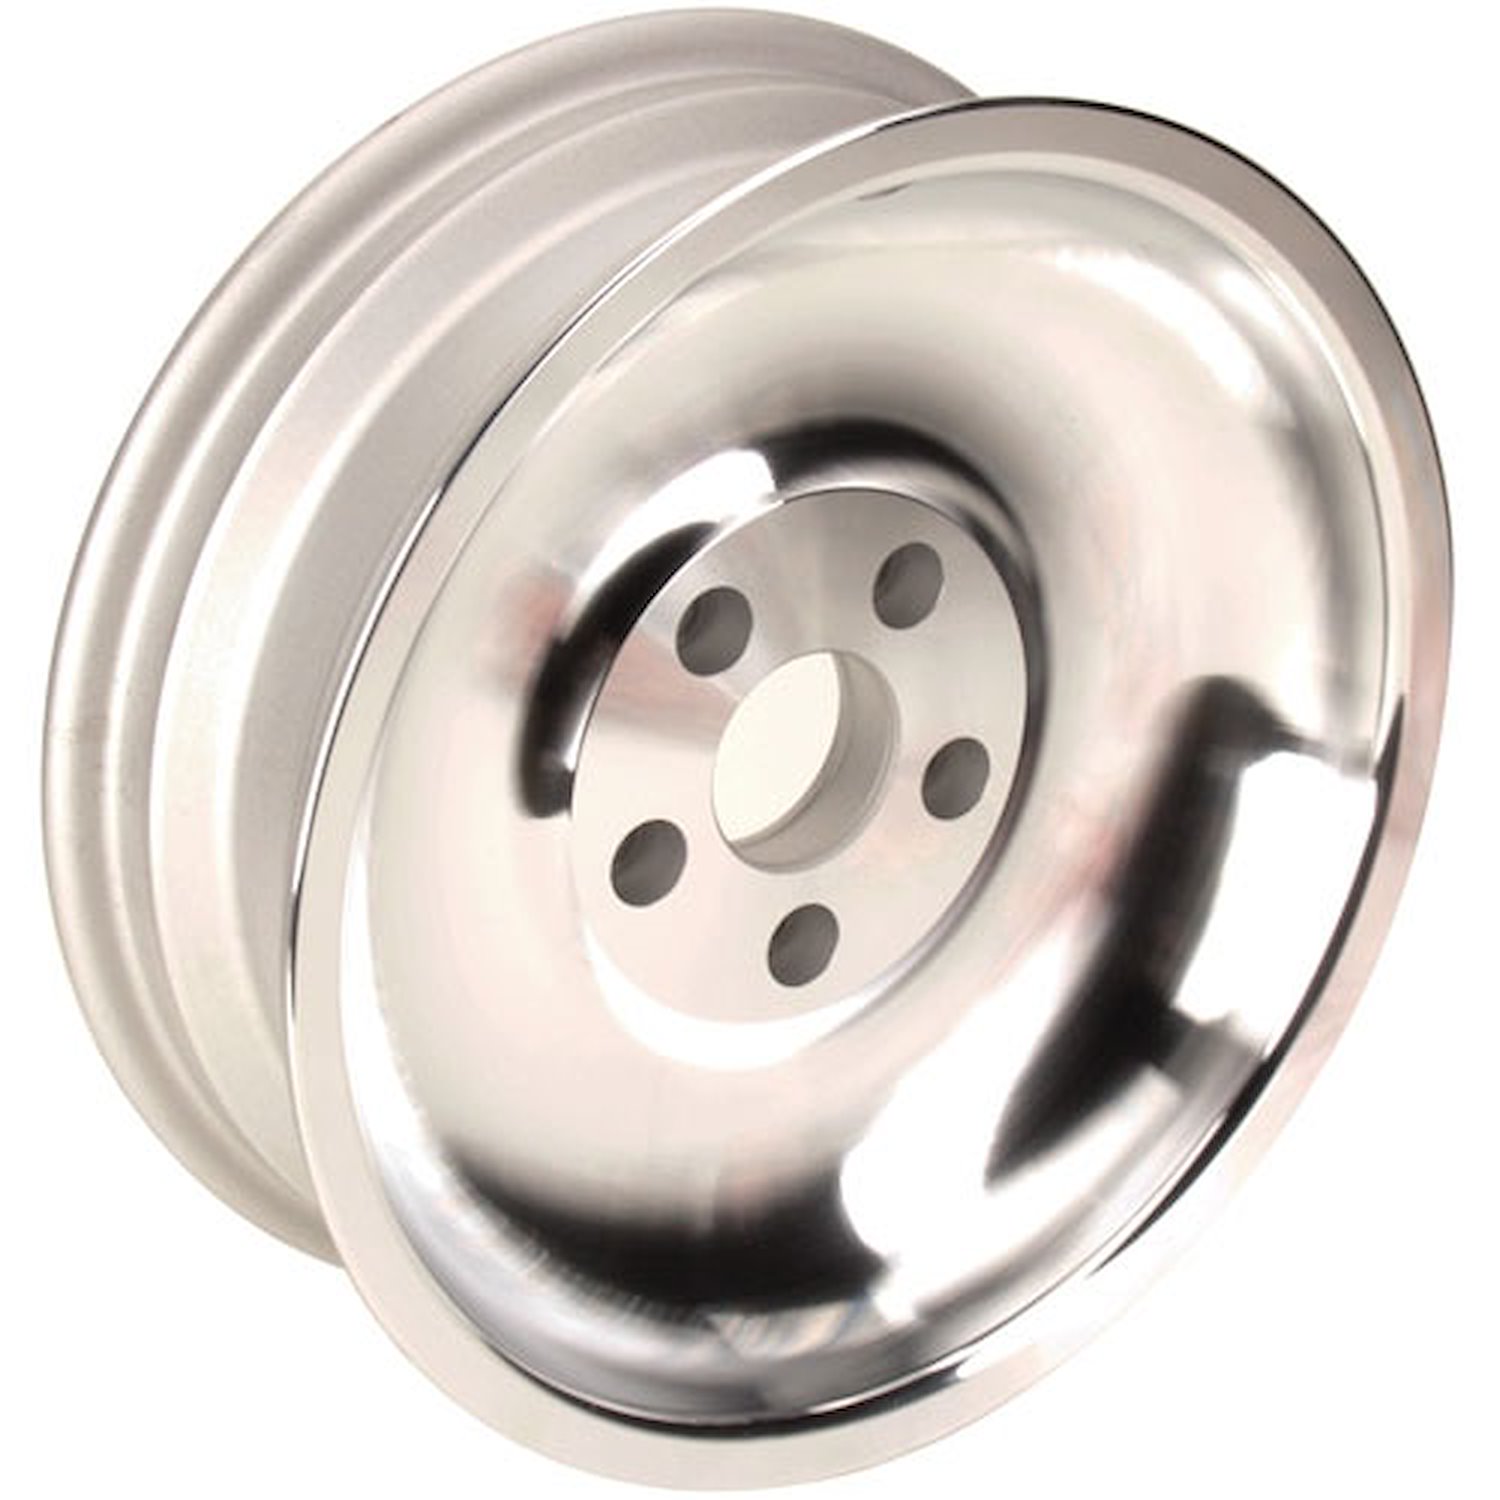 Solid Wheel - Machined Size: 16" x 5"